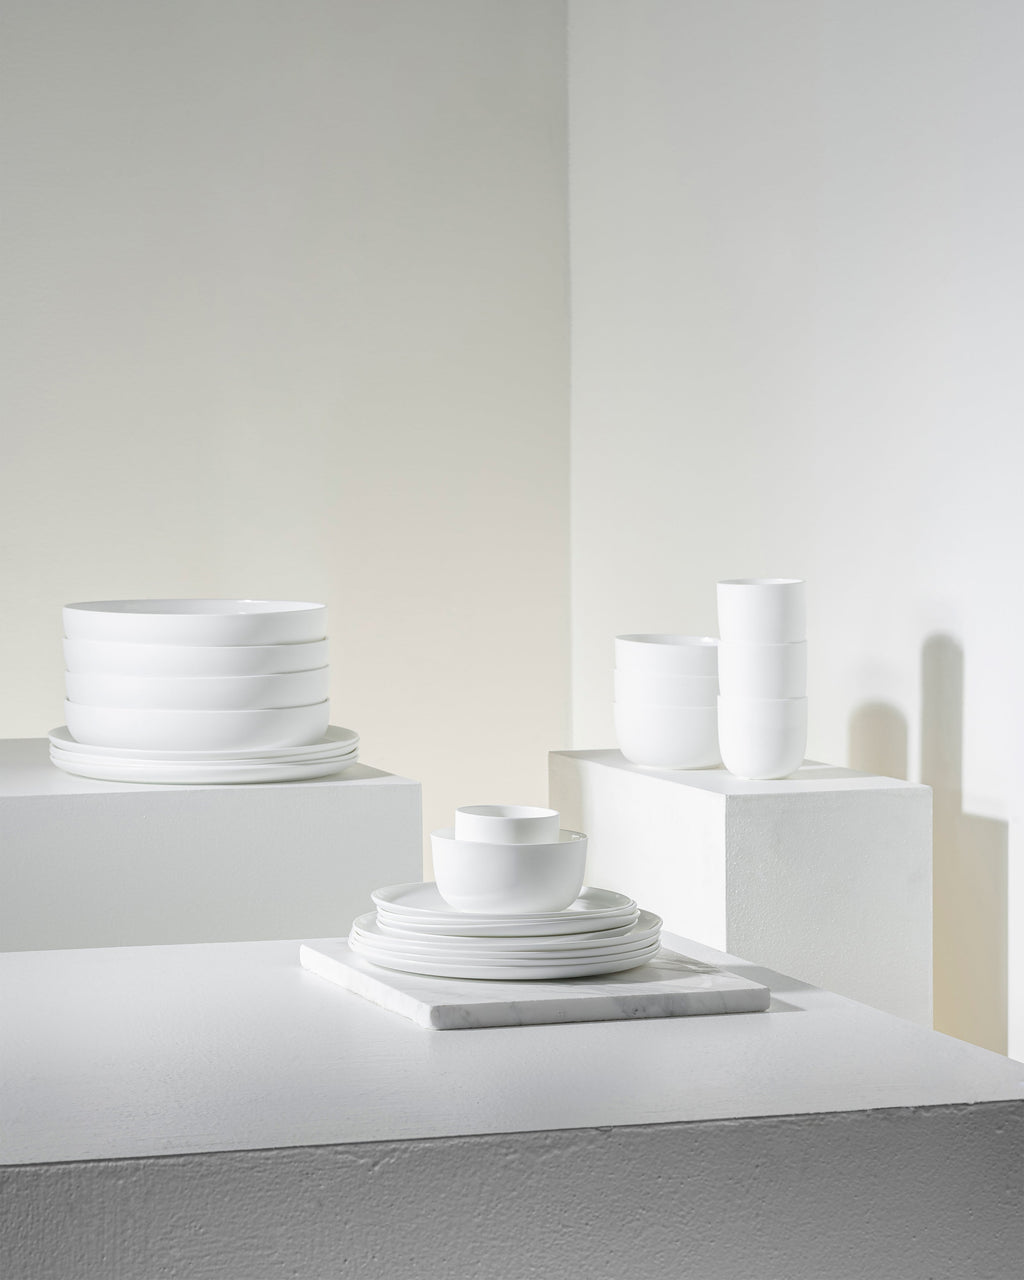 Full Set 24 pieces - Set Base tableware by Piet Boon - white